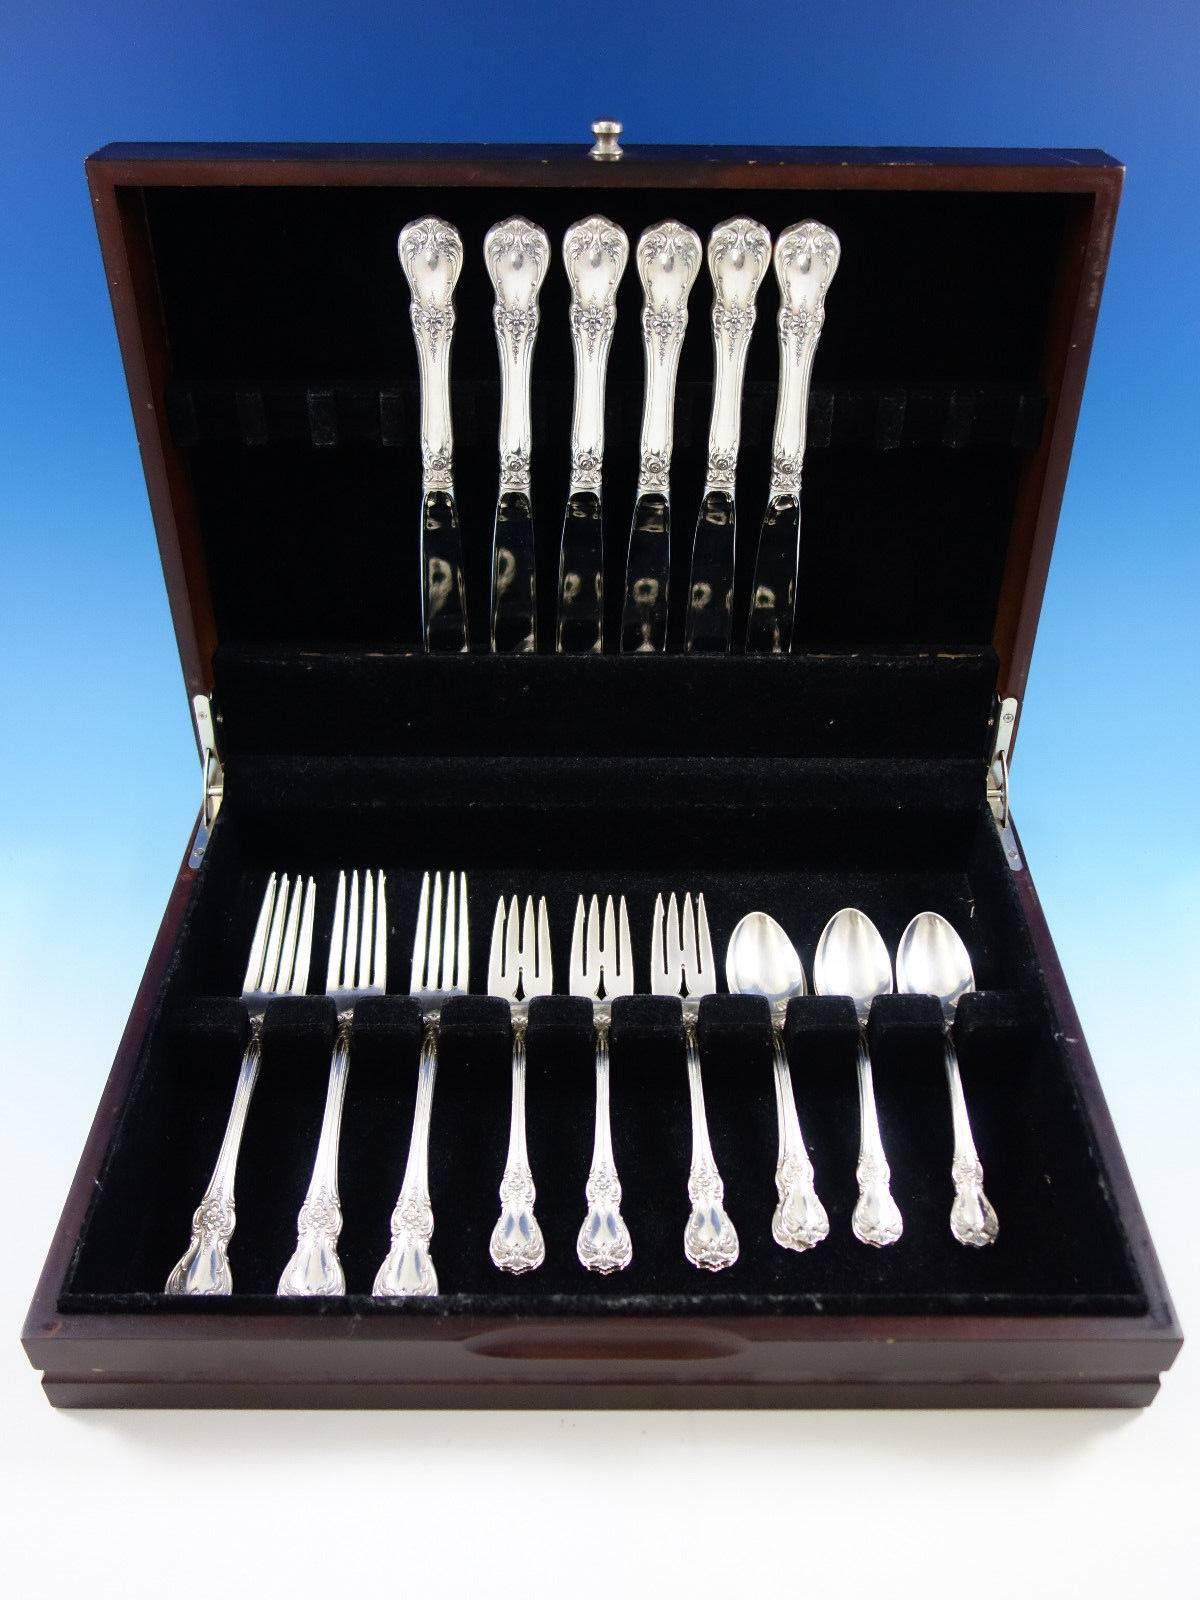 Dinner size old master by Towle sterling silver flatware set of 24 pieces. Great starter set! This set includes: 
Six dinner size knives, 9 5/8